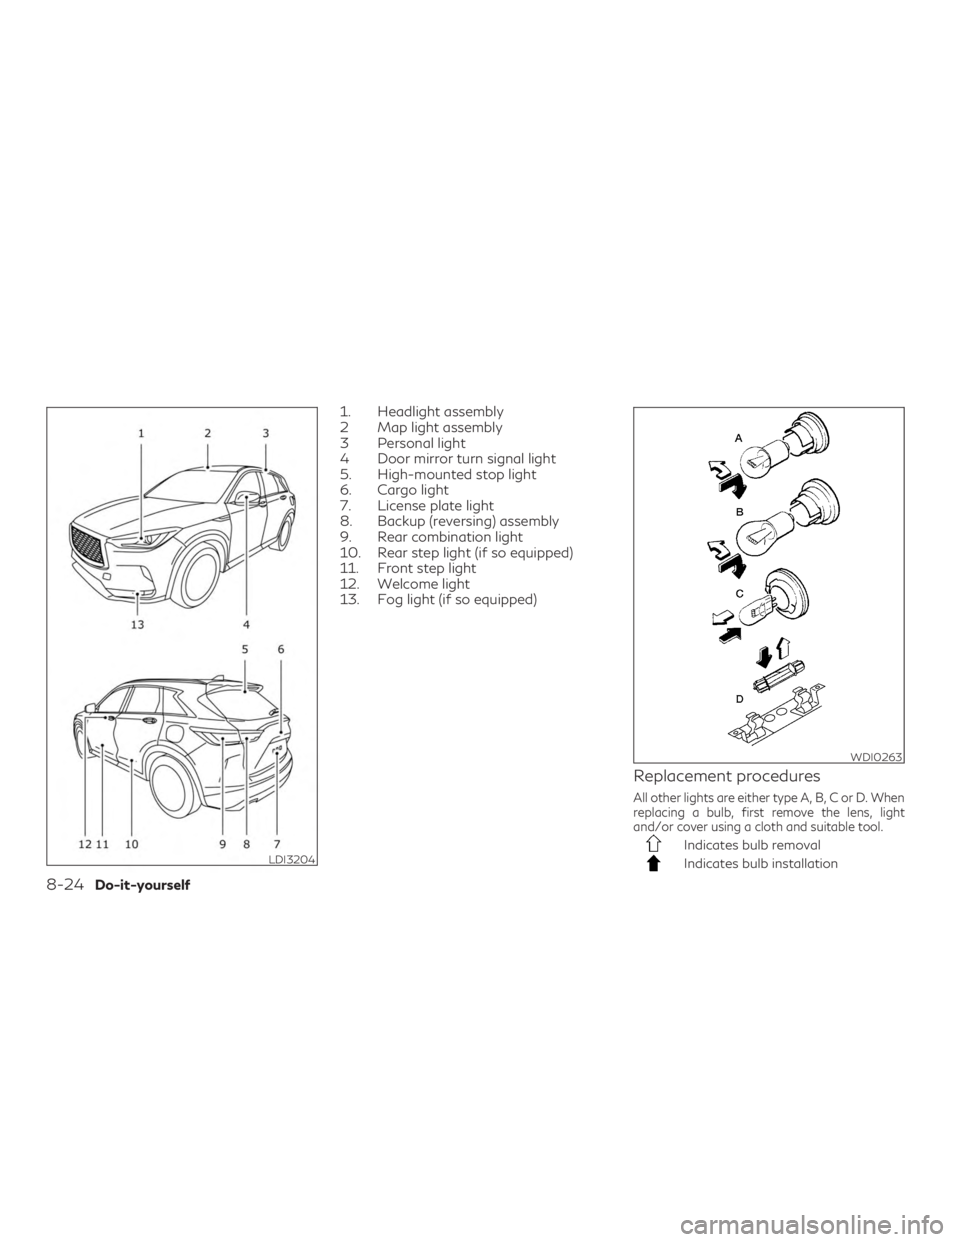 INFINITI QX50 2020  Owners Manual 1. Headlight assembly
2 Map light assembly
3 Personal light
4 Door mirror turn signal light
5. High-mounted stop light
6. Cargo light
7. License plate light
8. Backup (reversing) assembly
9. Rear comb